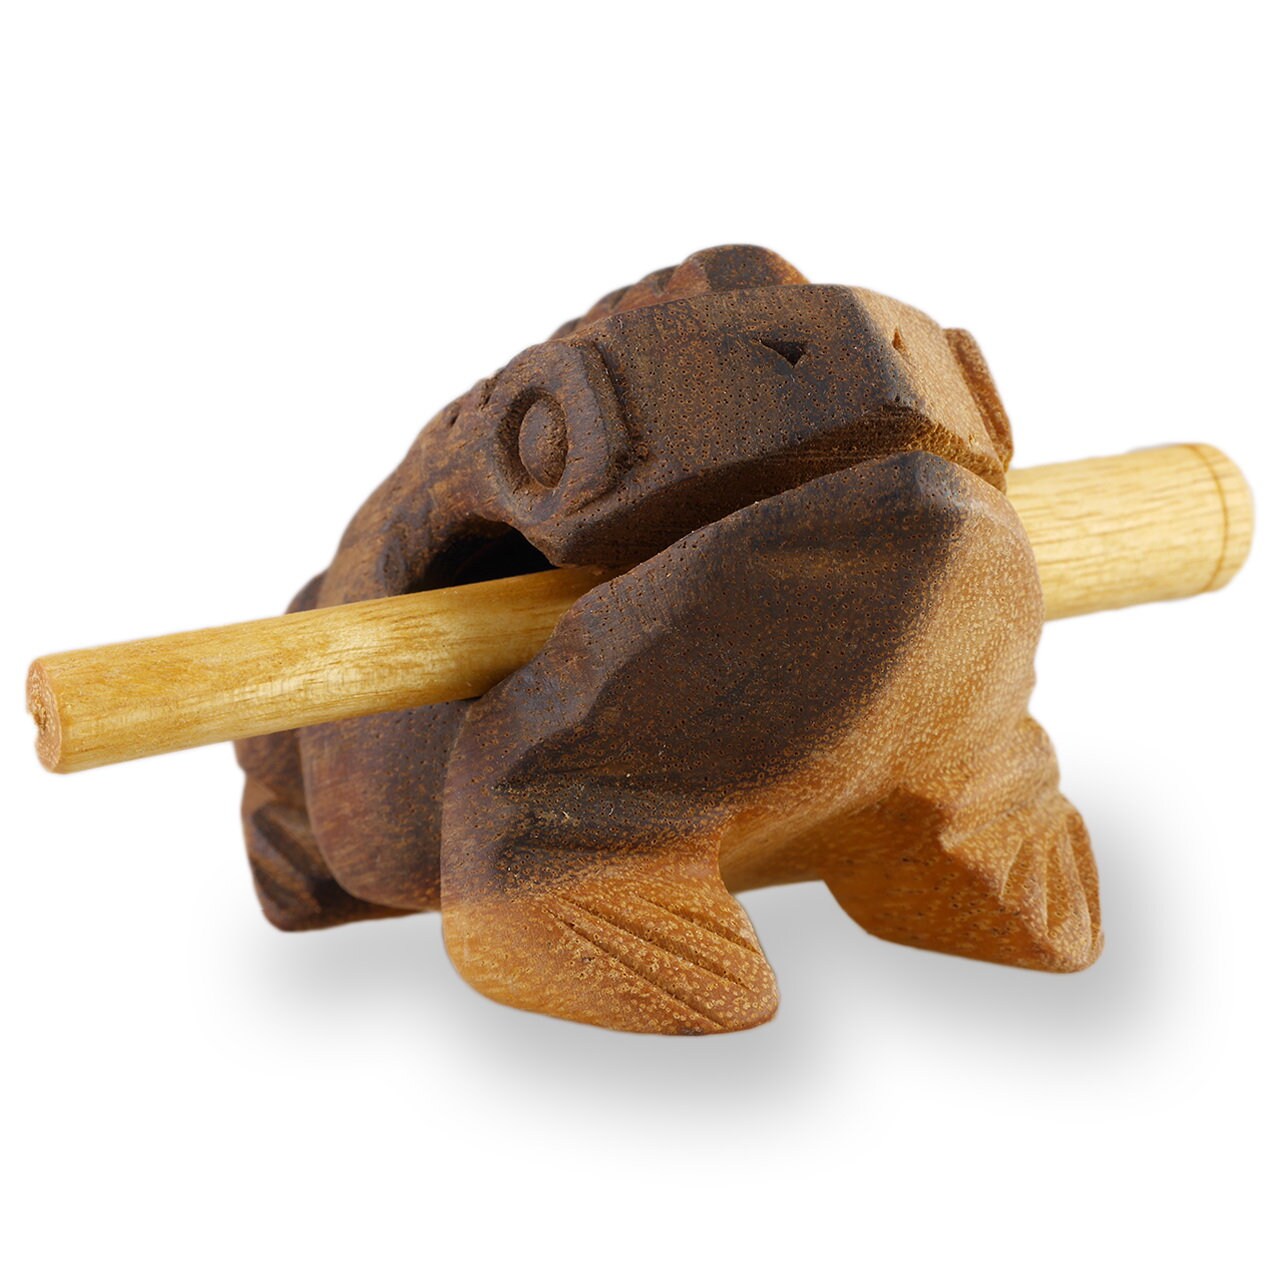 Sound frog ratsch ratsch made of mango wood, robustly processed effect instrument in various sizes